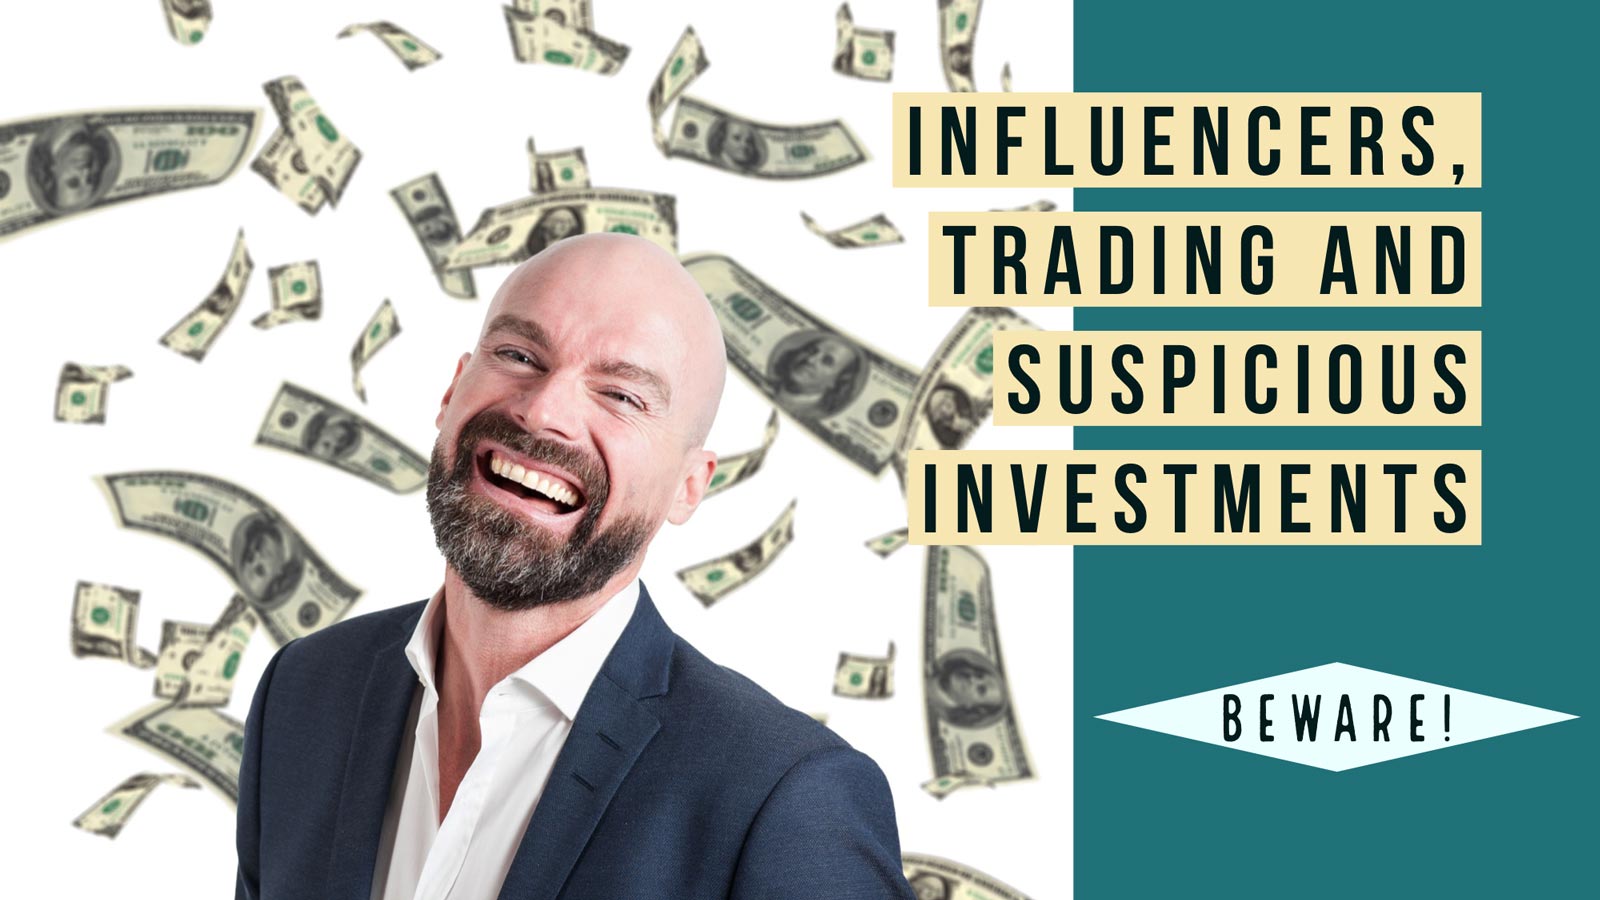 Influencers, trading and suspicious investments ...